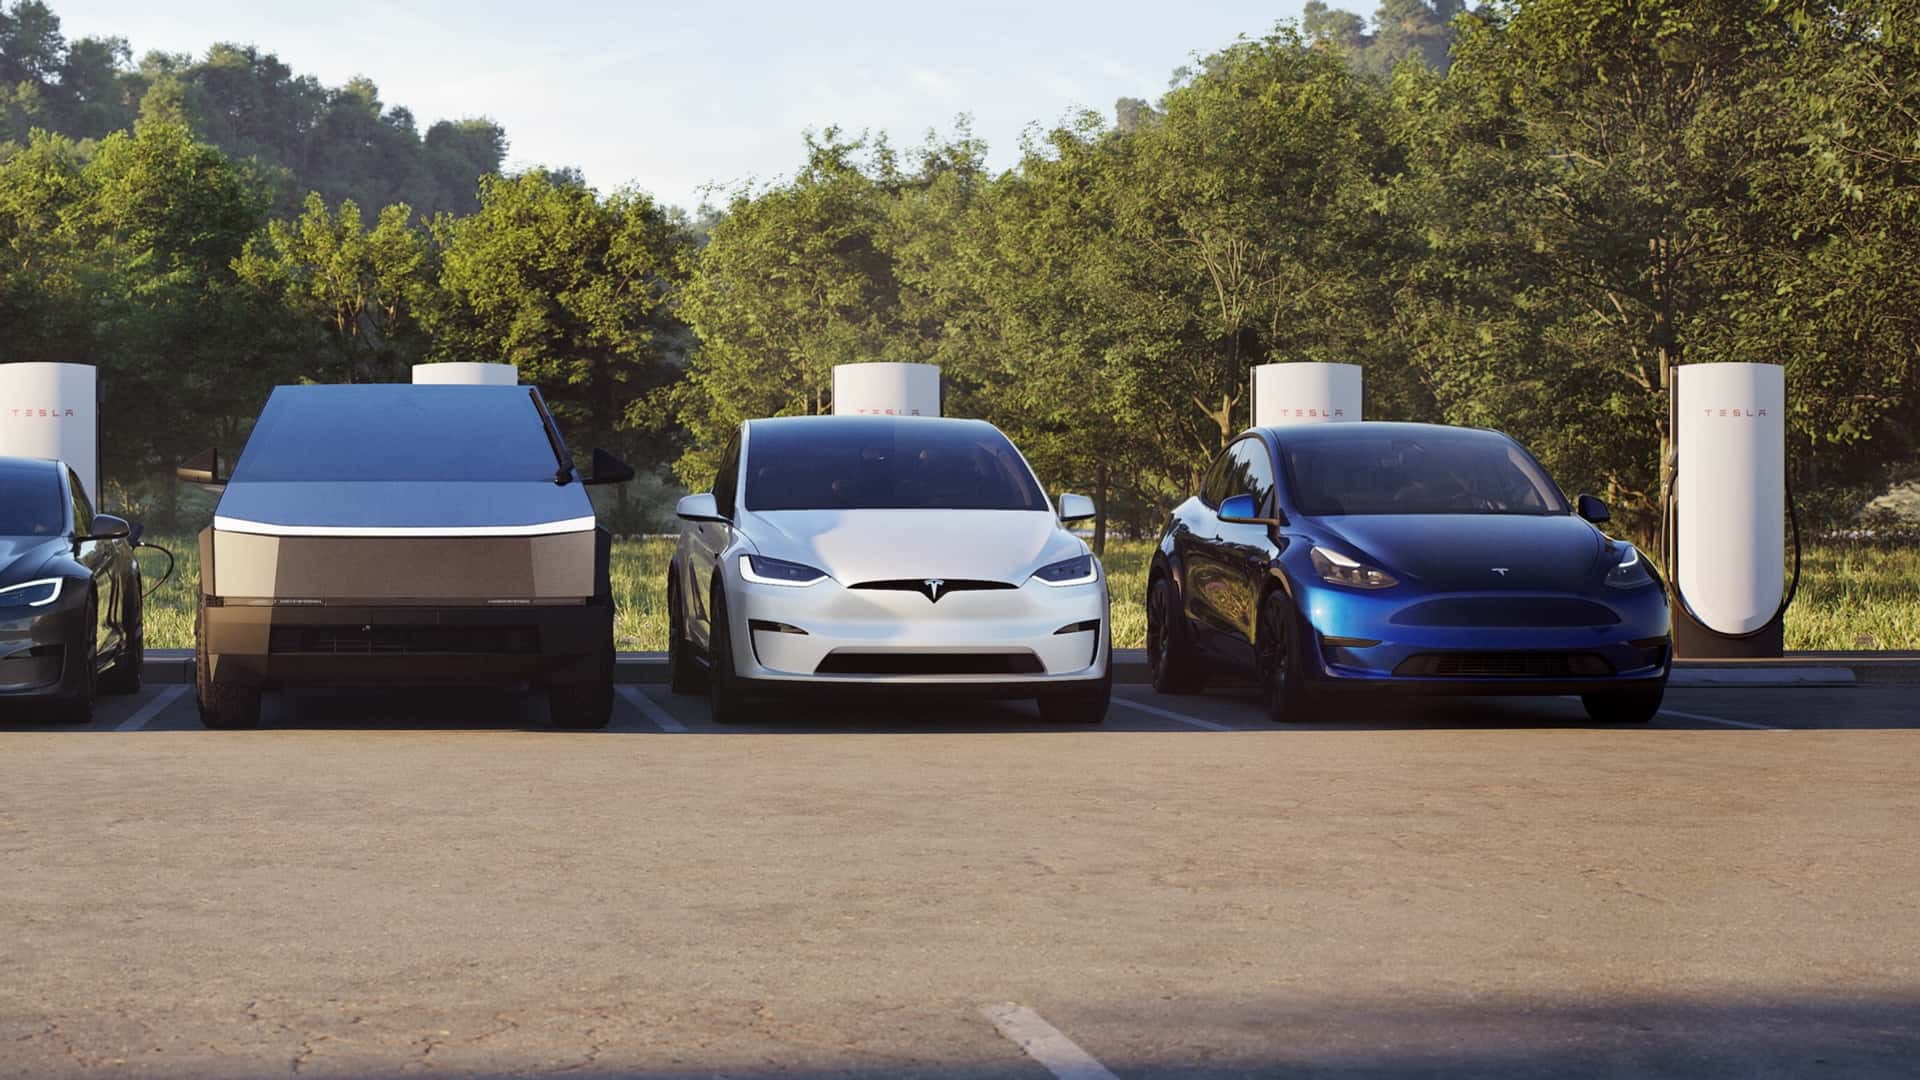 tesla's new largest supercharger will have 200 stalls